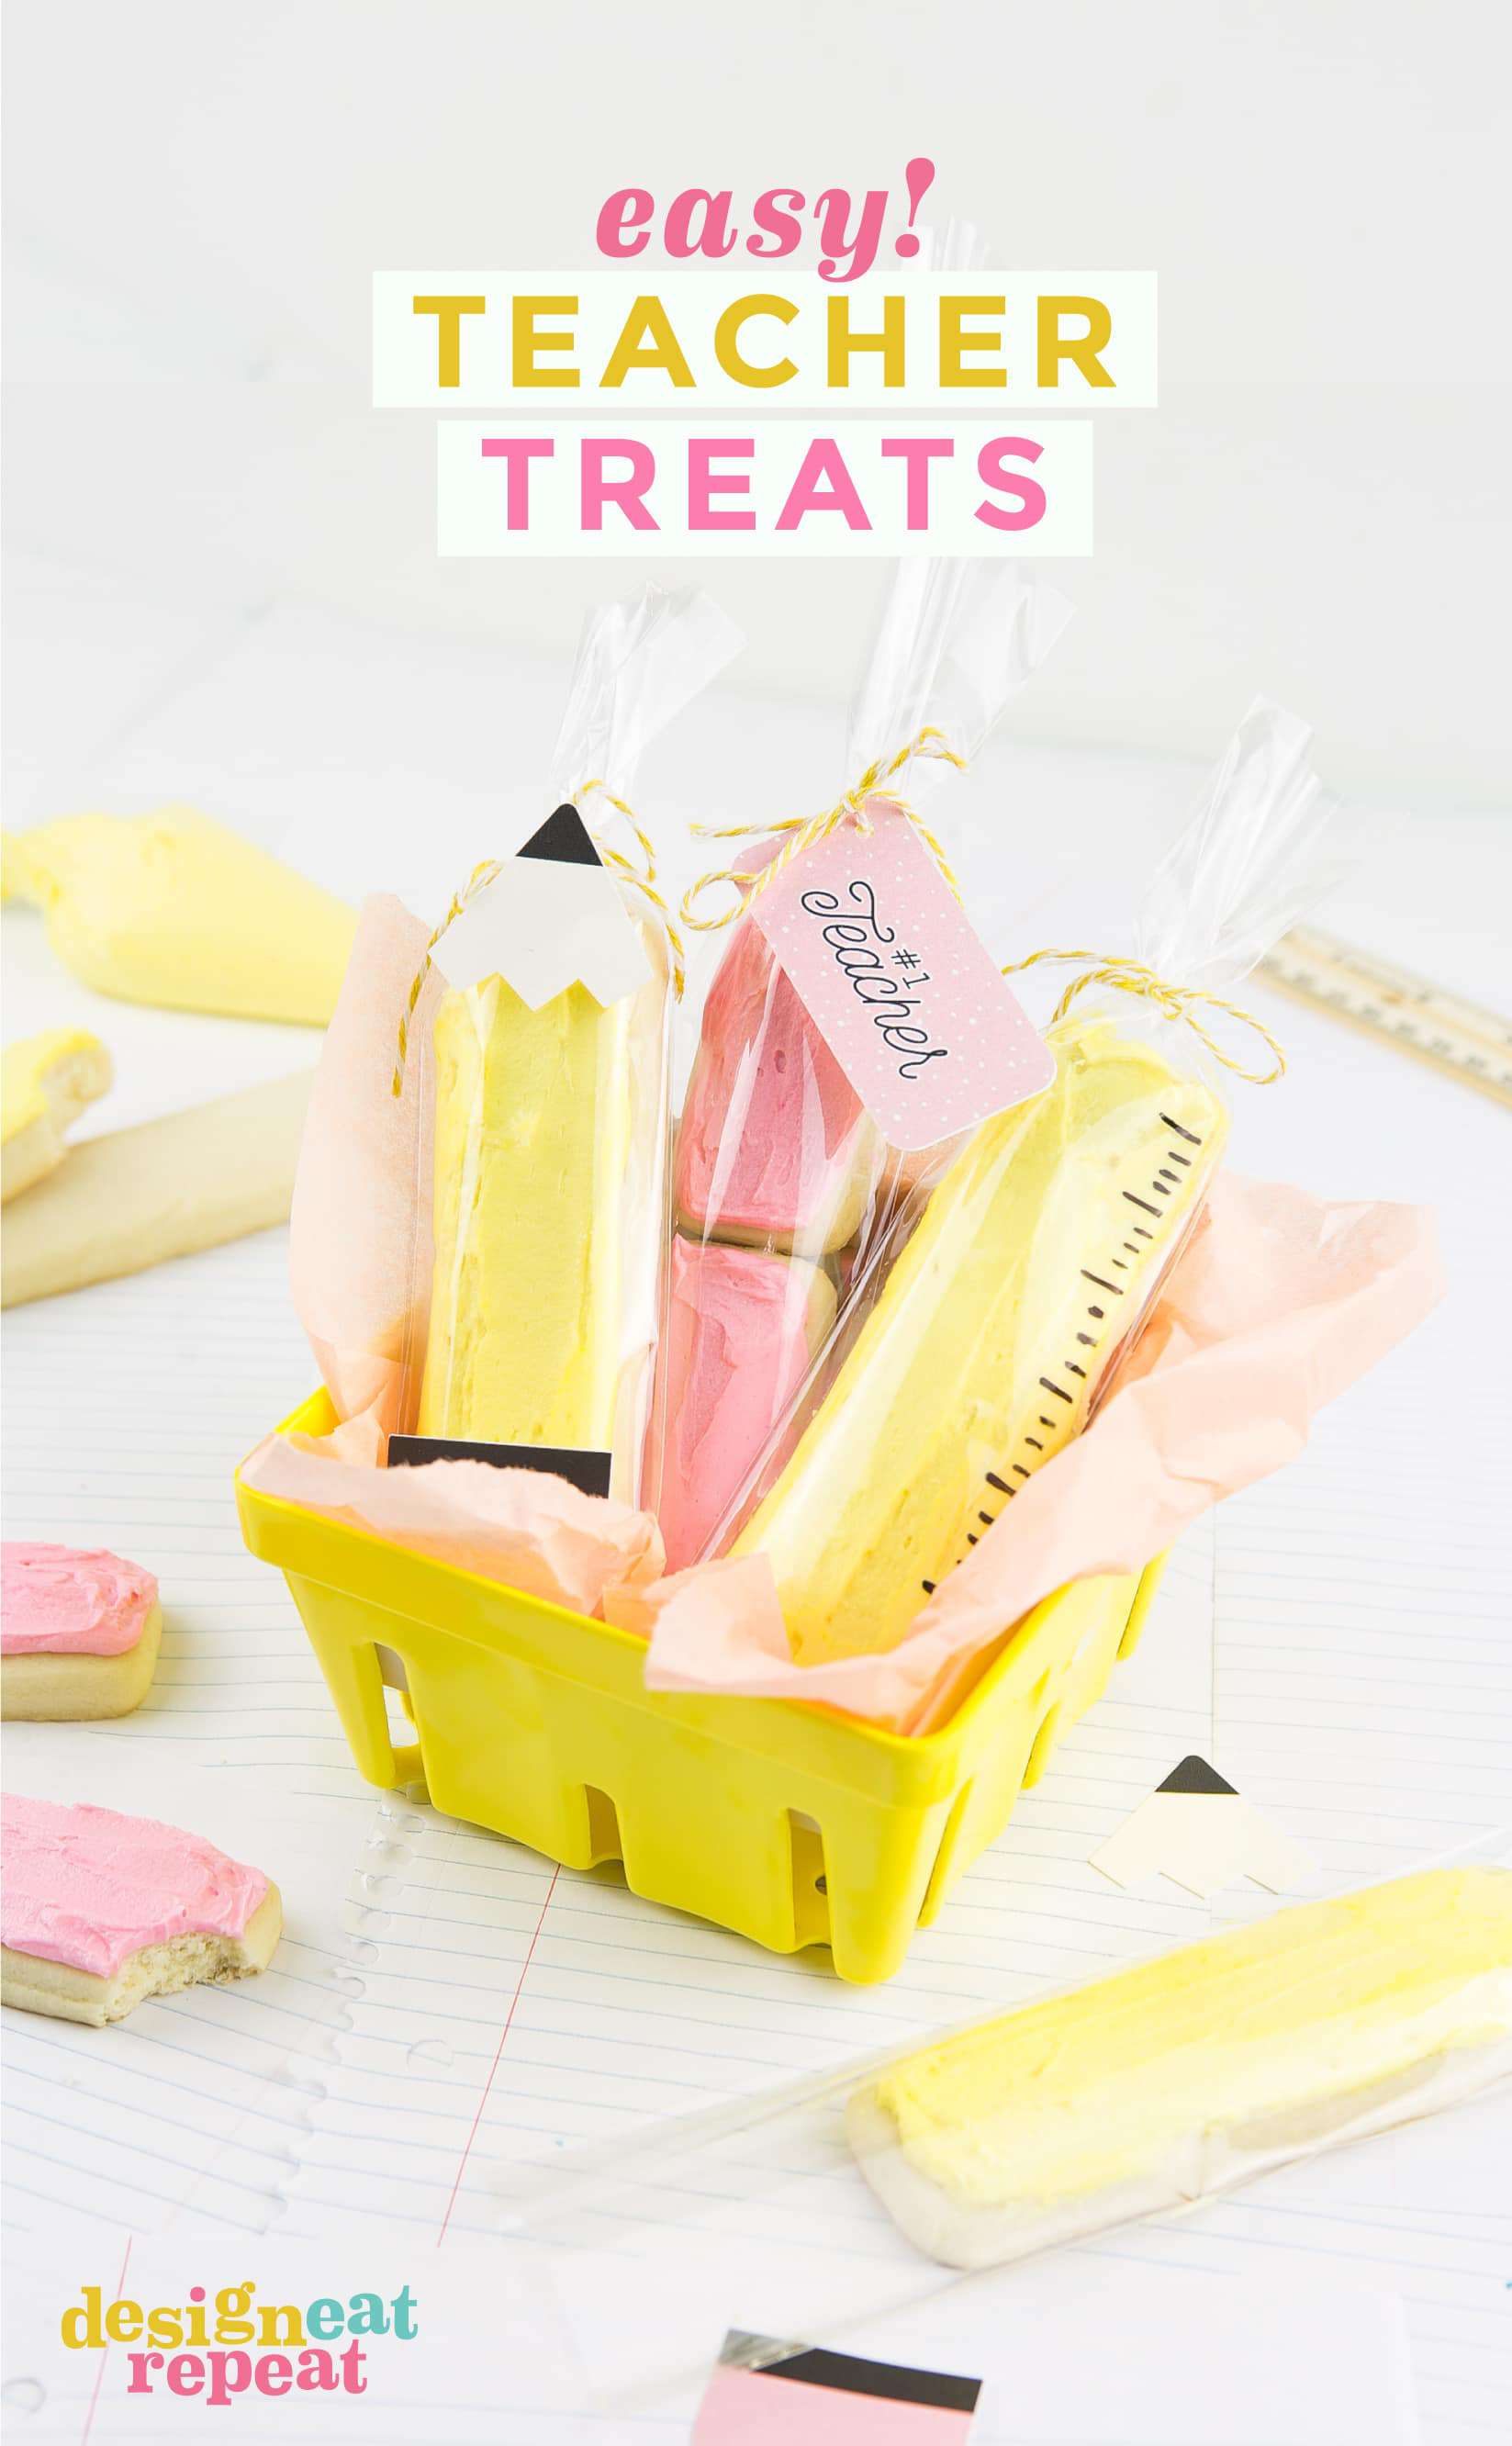 Yellow berry basket of sugar cookie sticks decorated like a pencil, eraser, and ruler.